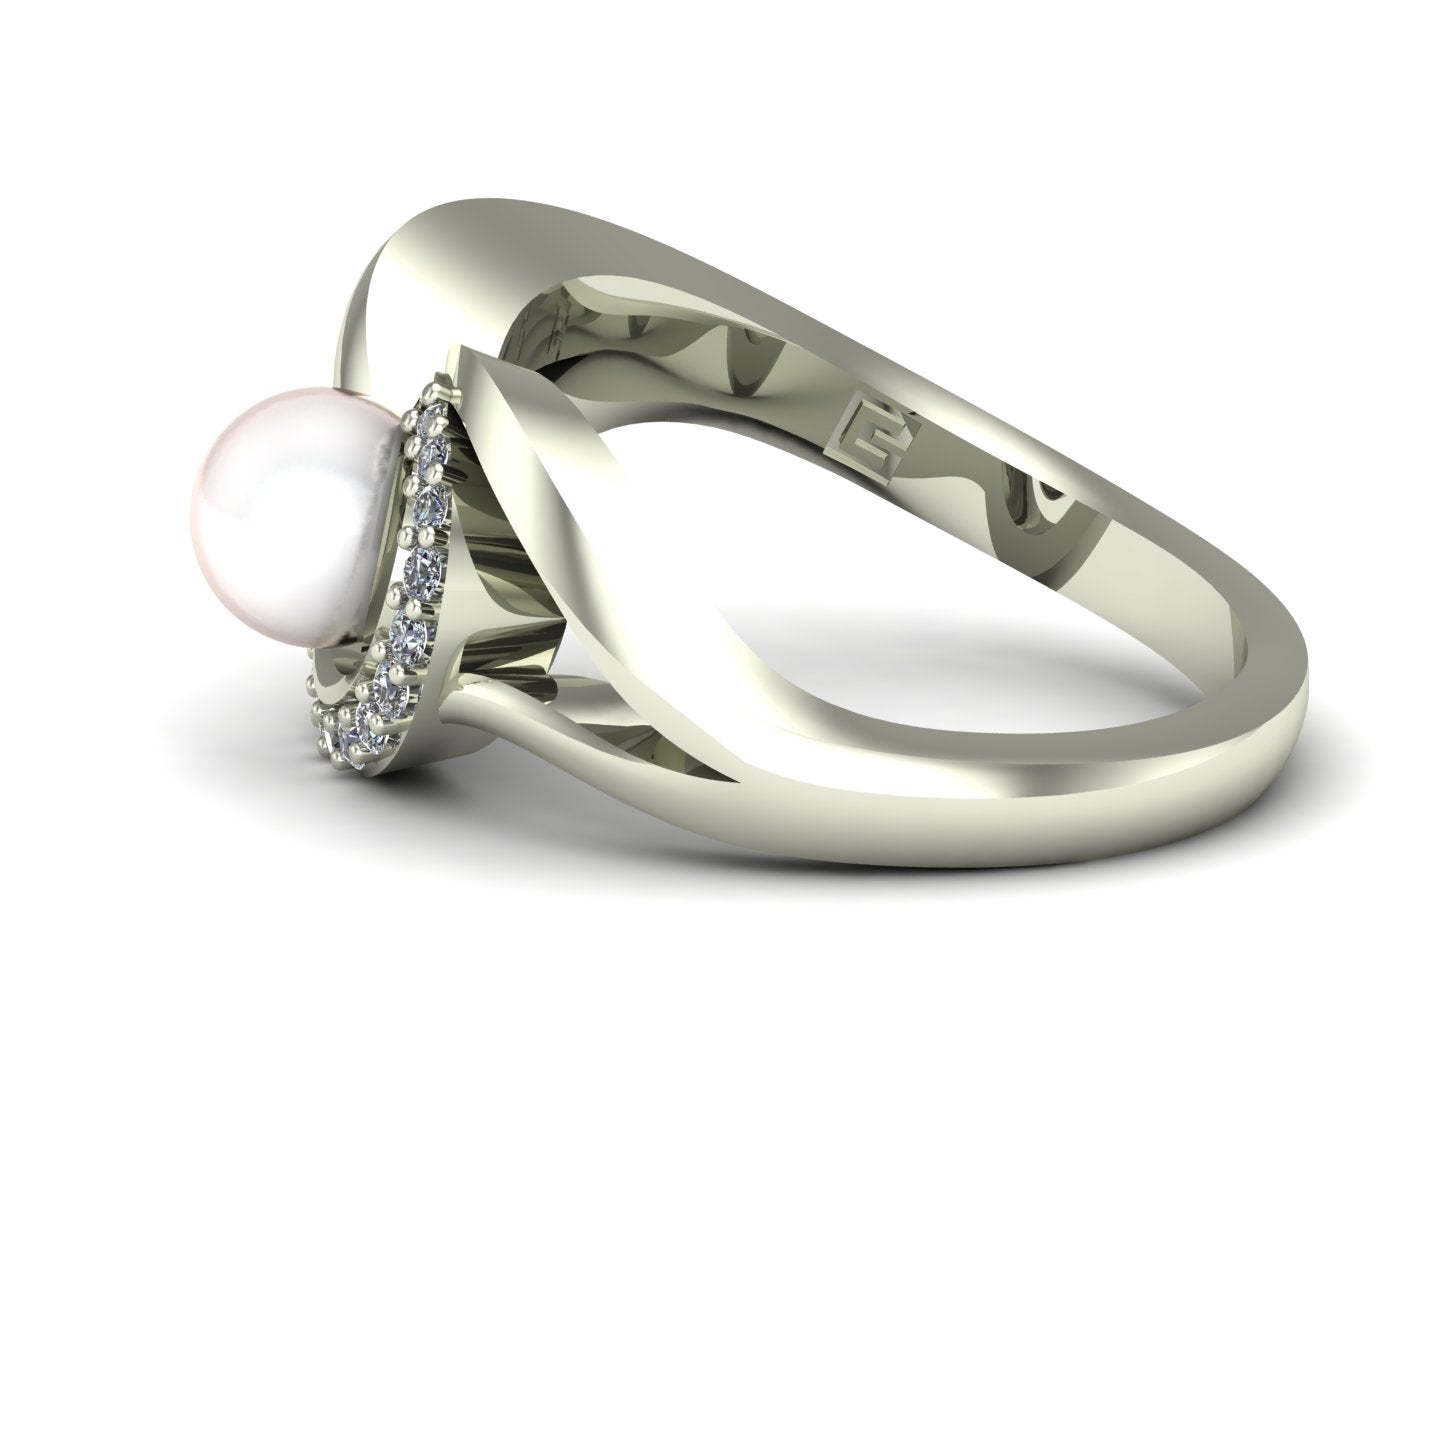 pearl and diamond swirl ring in 14k white gold - Charles Babb Designs - side view